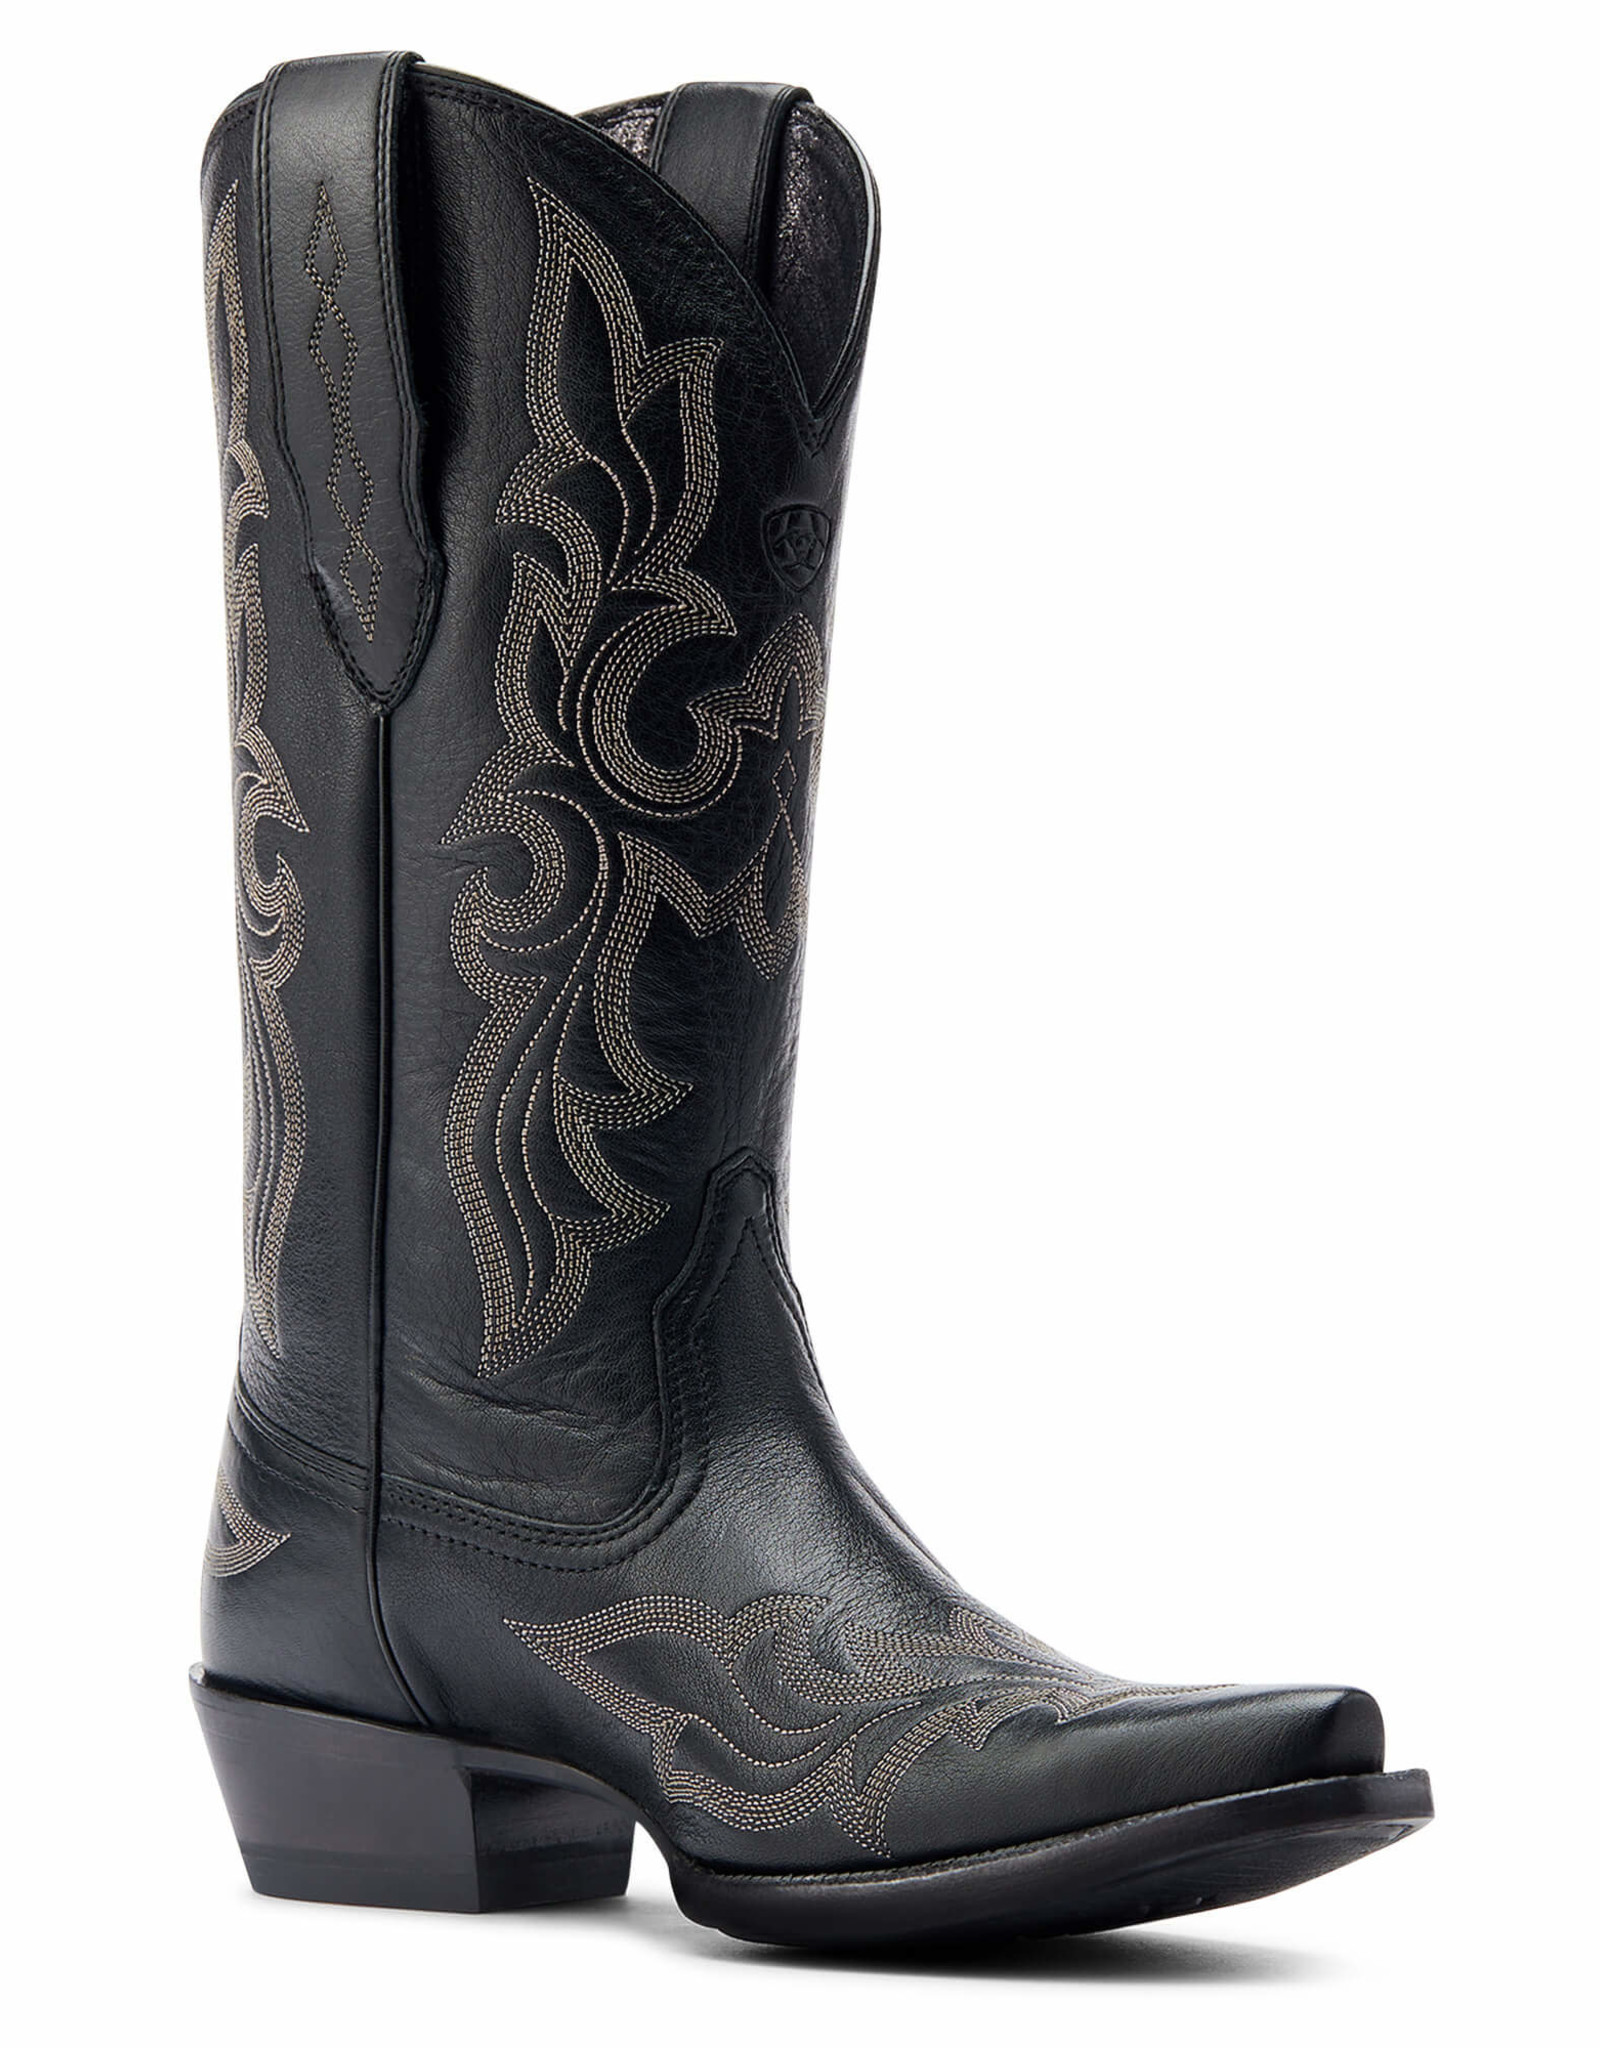 Ariat Womens Ariat Jennings Black Snip Toe Stretch Fit Western Cowboy Boot